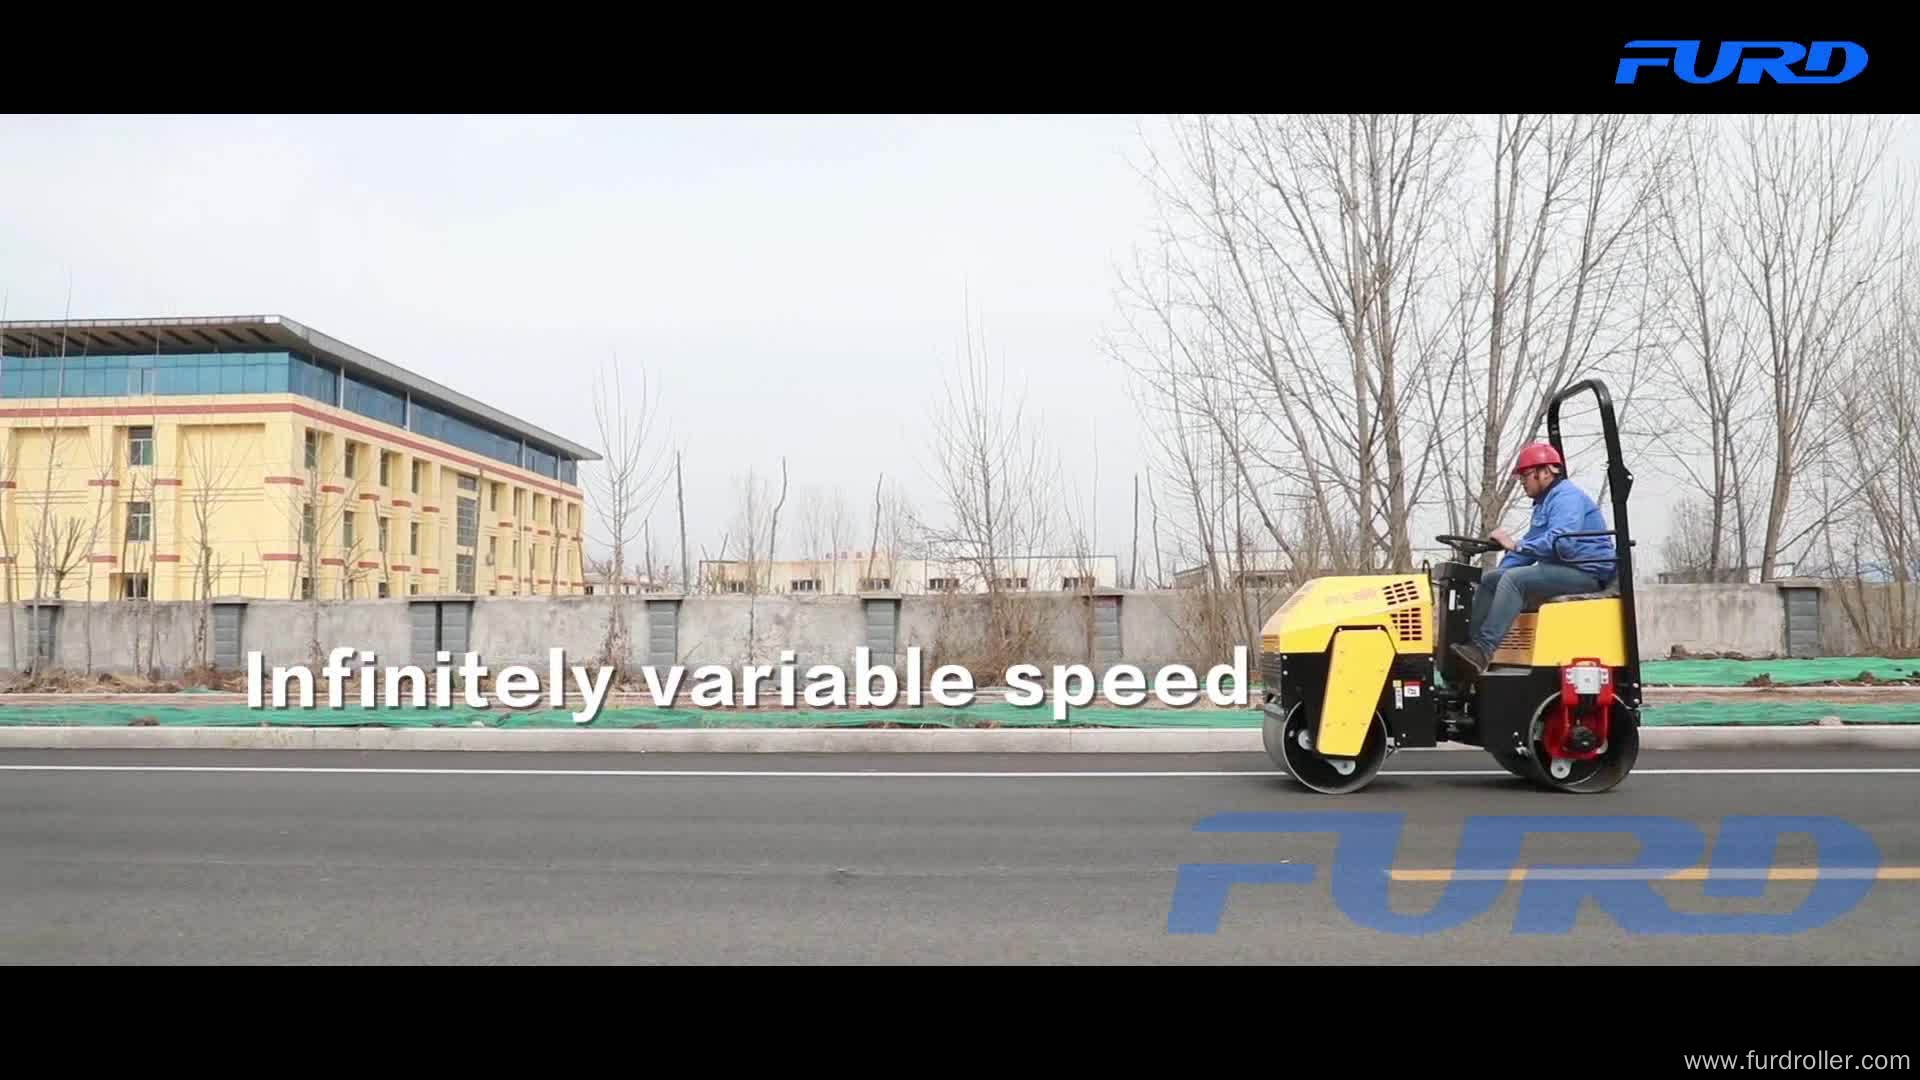 Drive Type Asphalt Mini Road Roller Compactor with 1 Ton Weight (FYL-880)